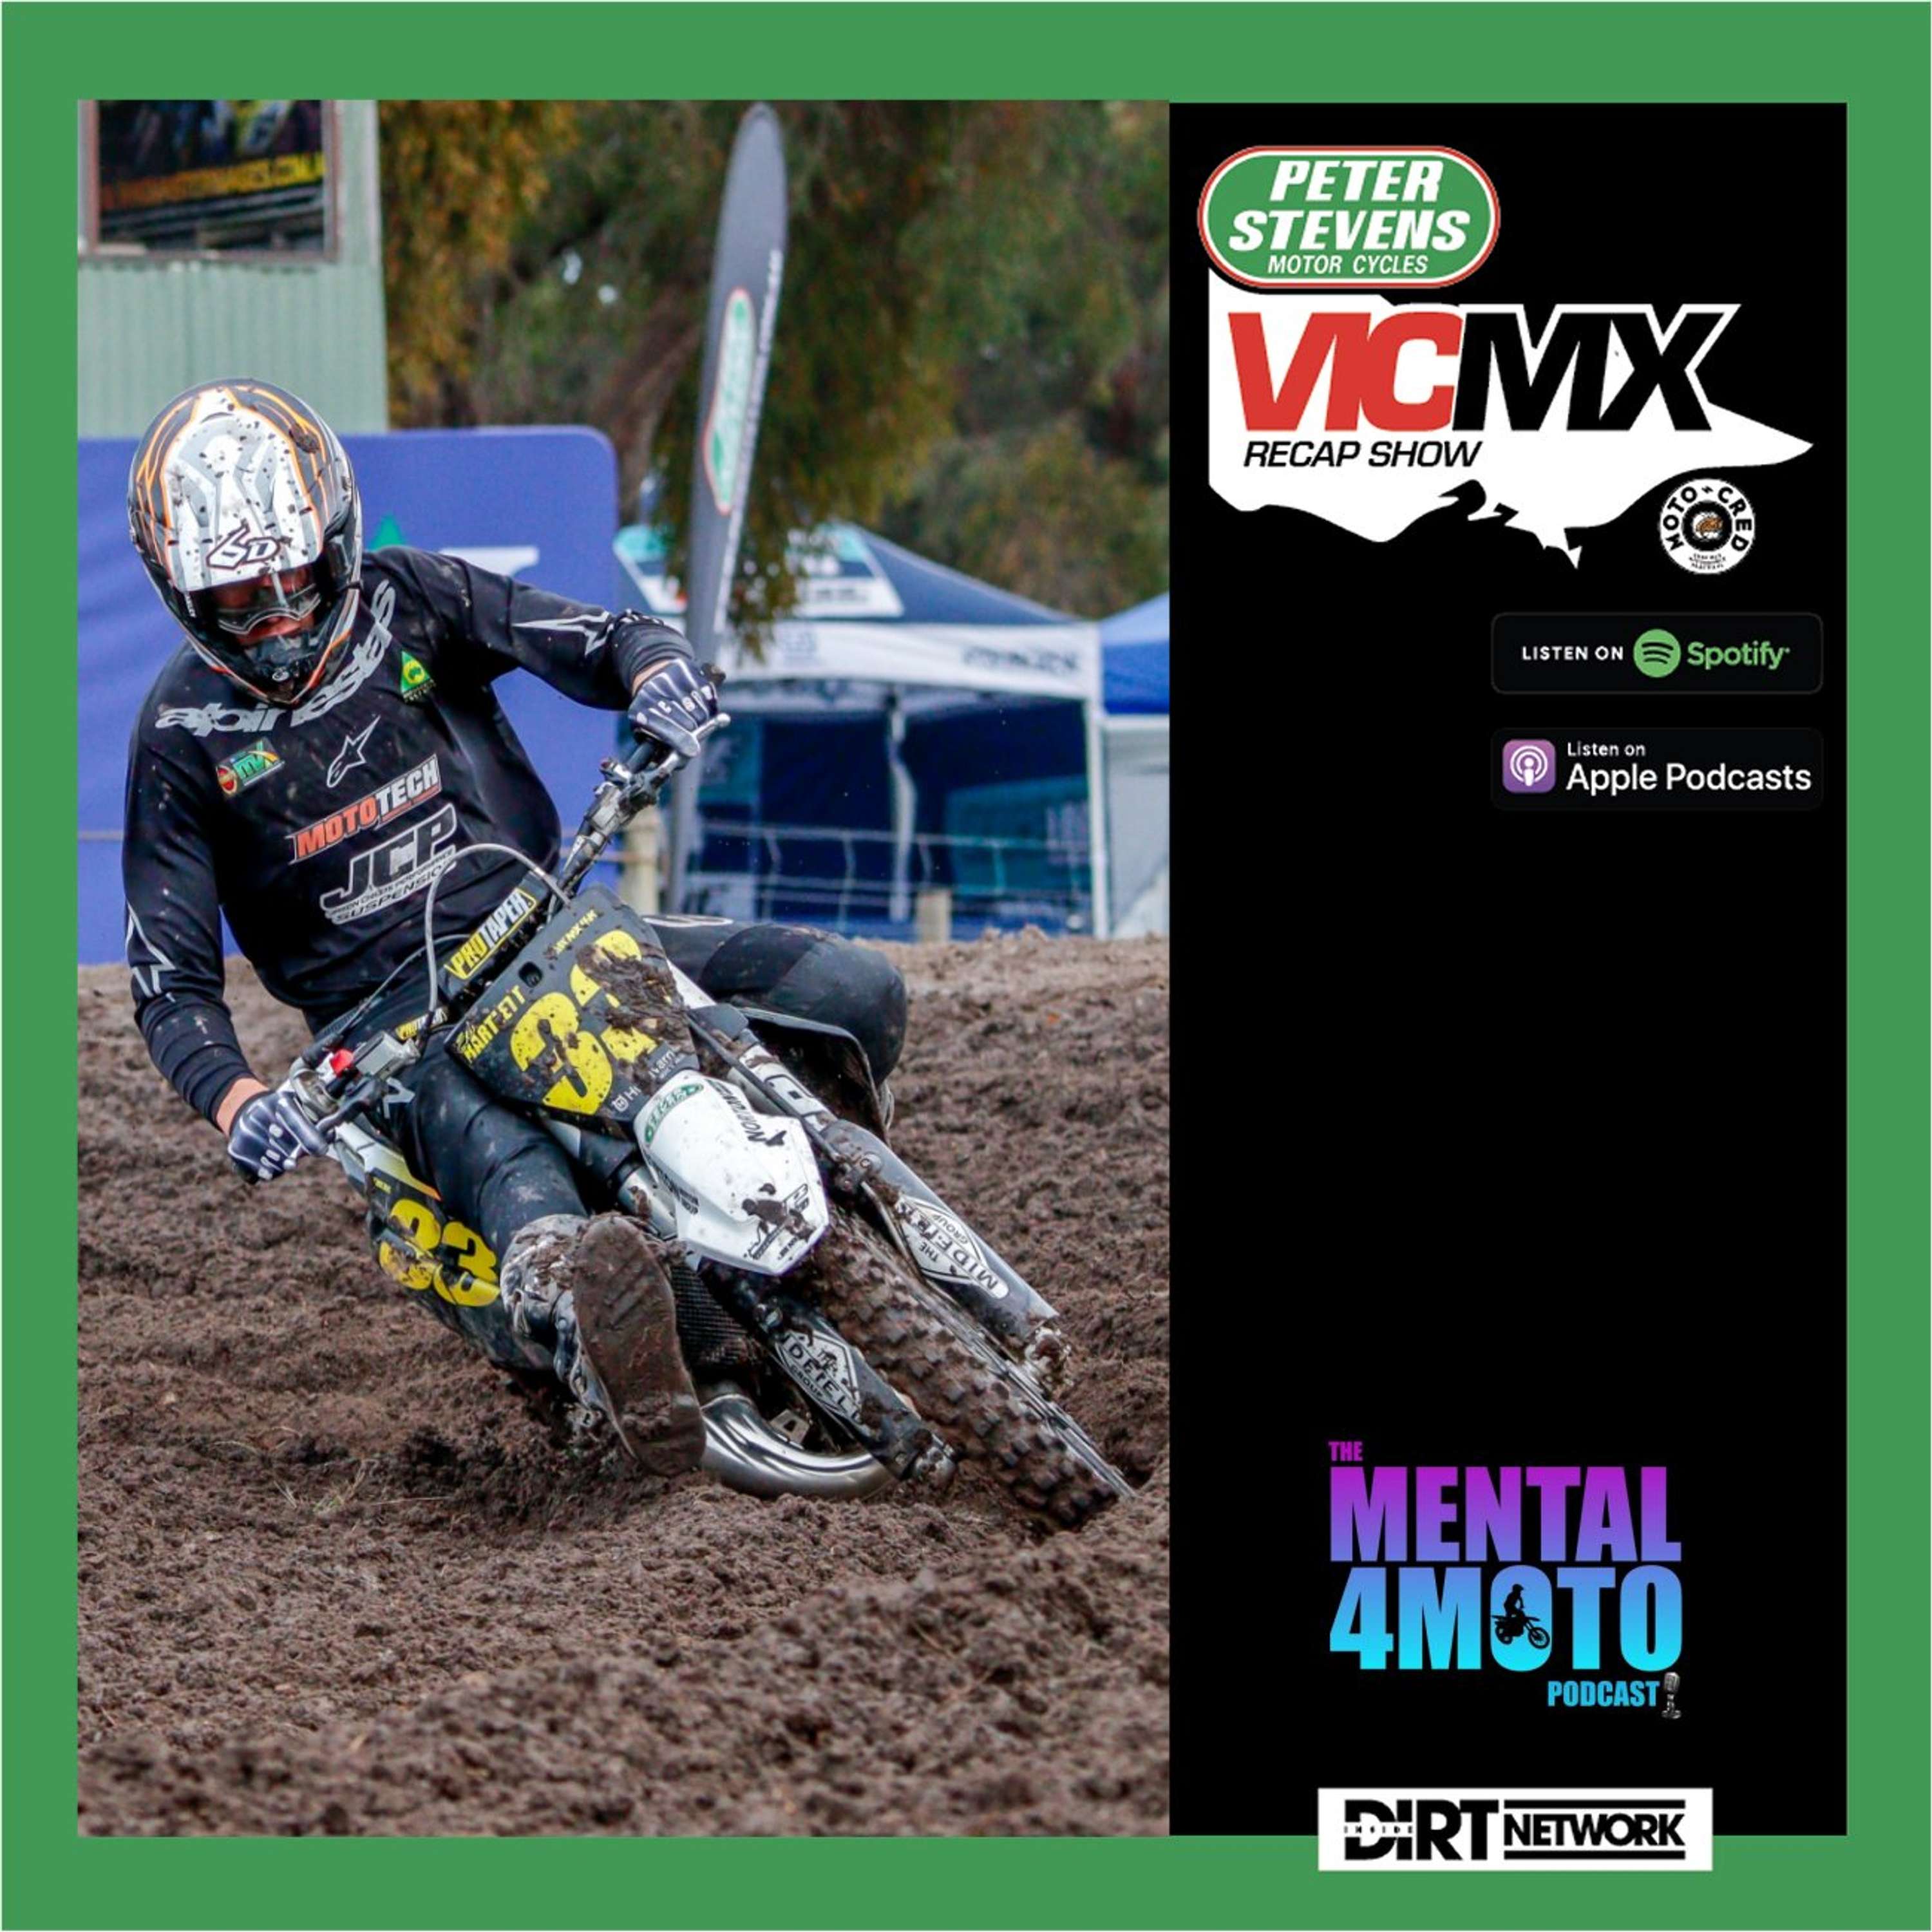 PETER STEVENS Vic MX Review Show presented by MOTO CRED - JNR's R2